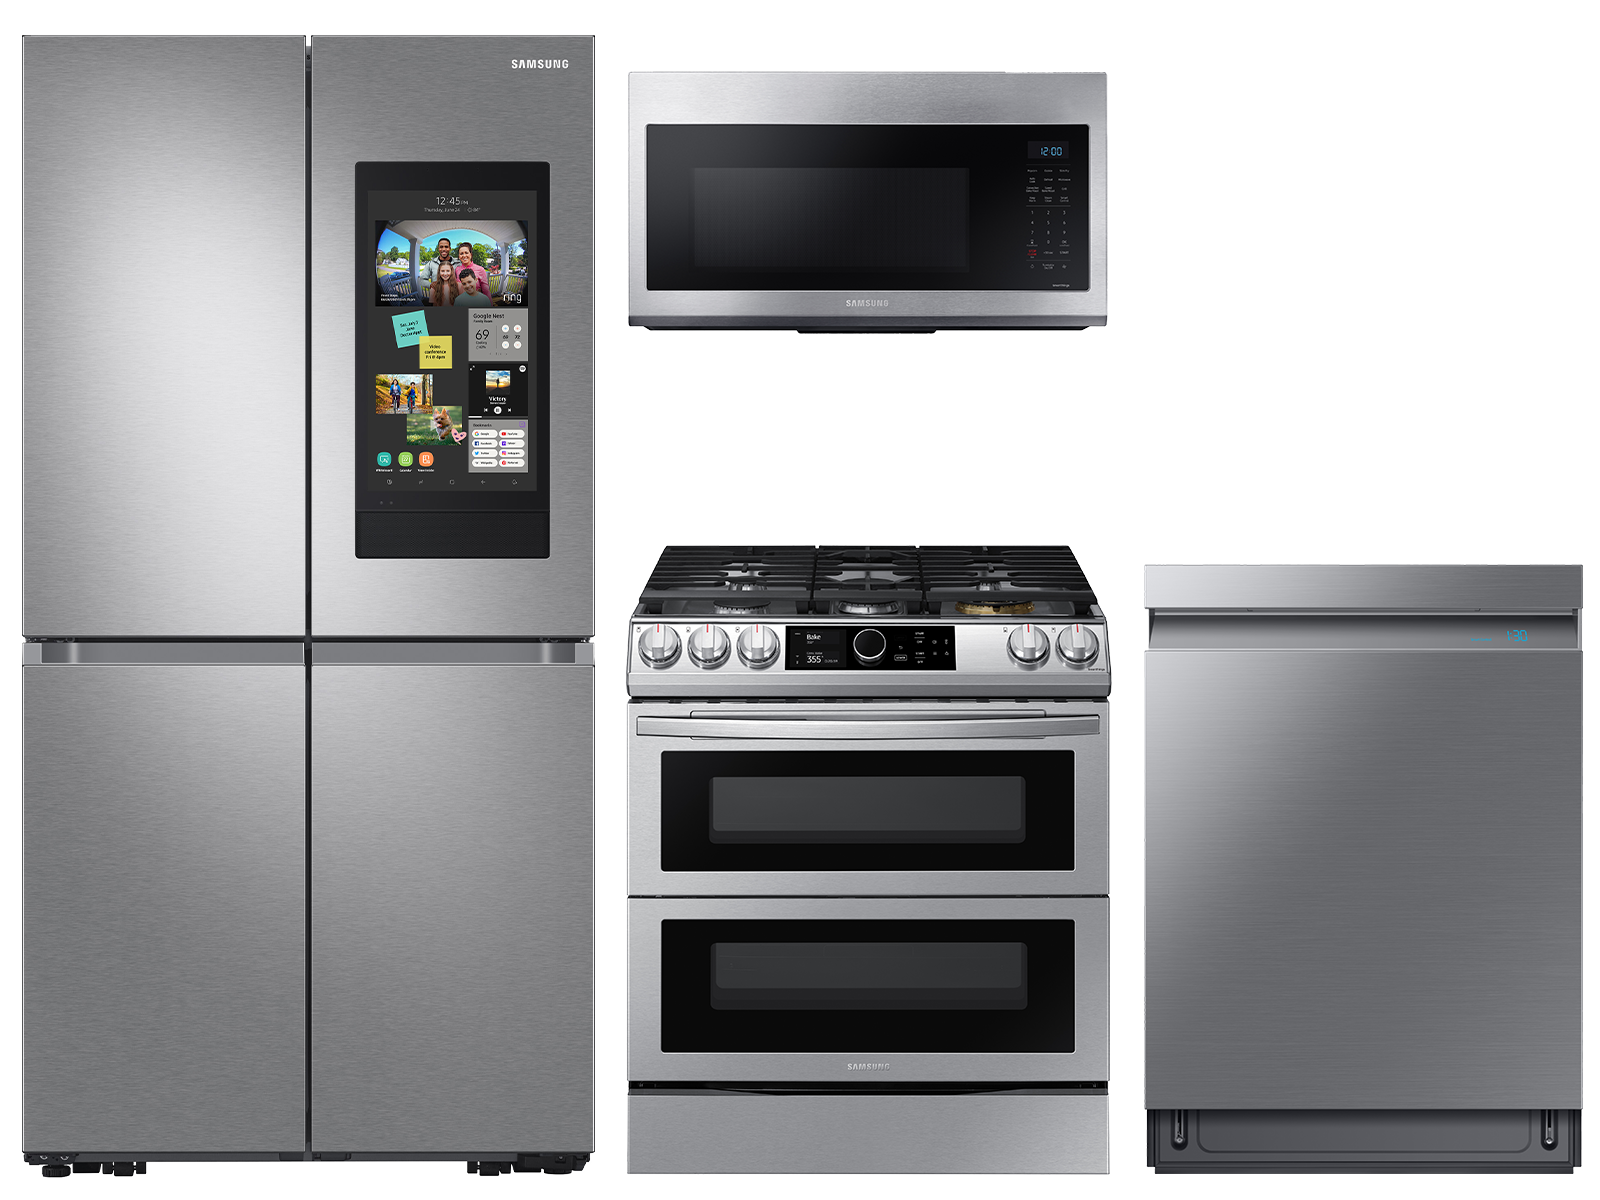 Samsung 29 cu. ft. Family Hub™ 4-Door refrigerator, gas range, convection microwave and Smart Linear dishwasher package in Stainless Steel